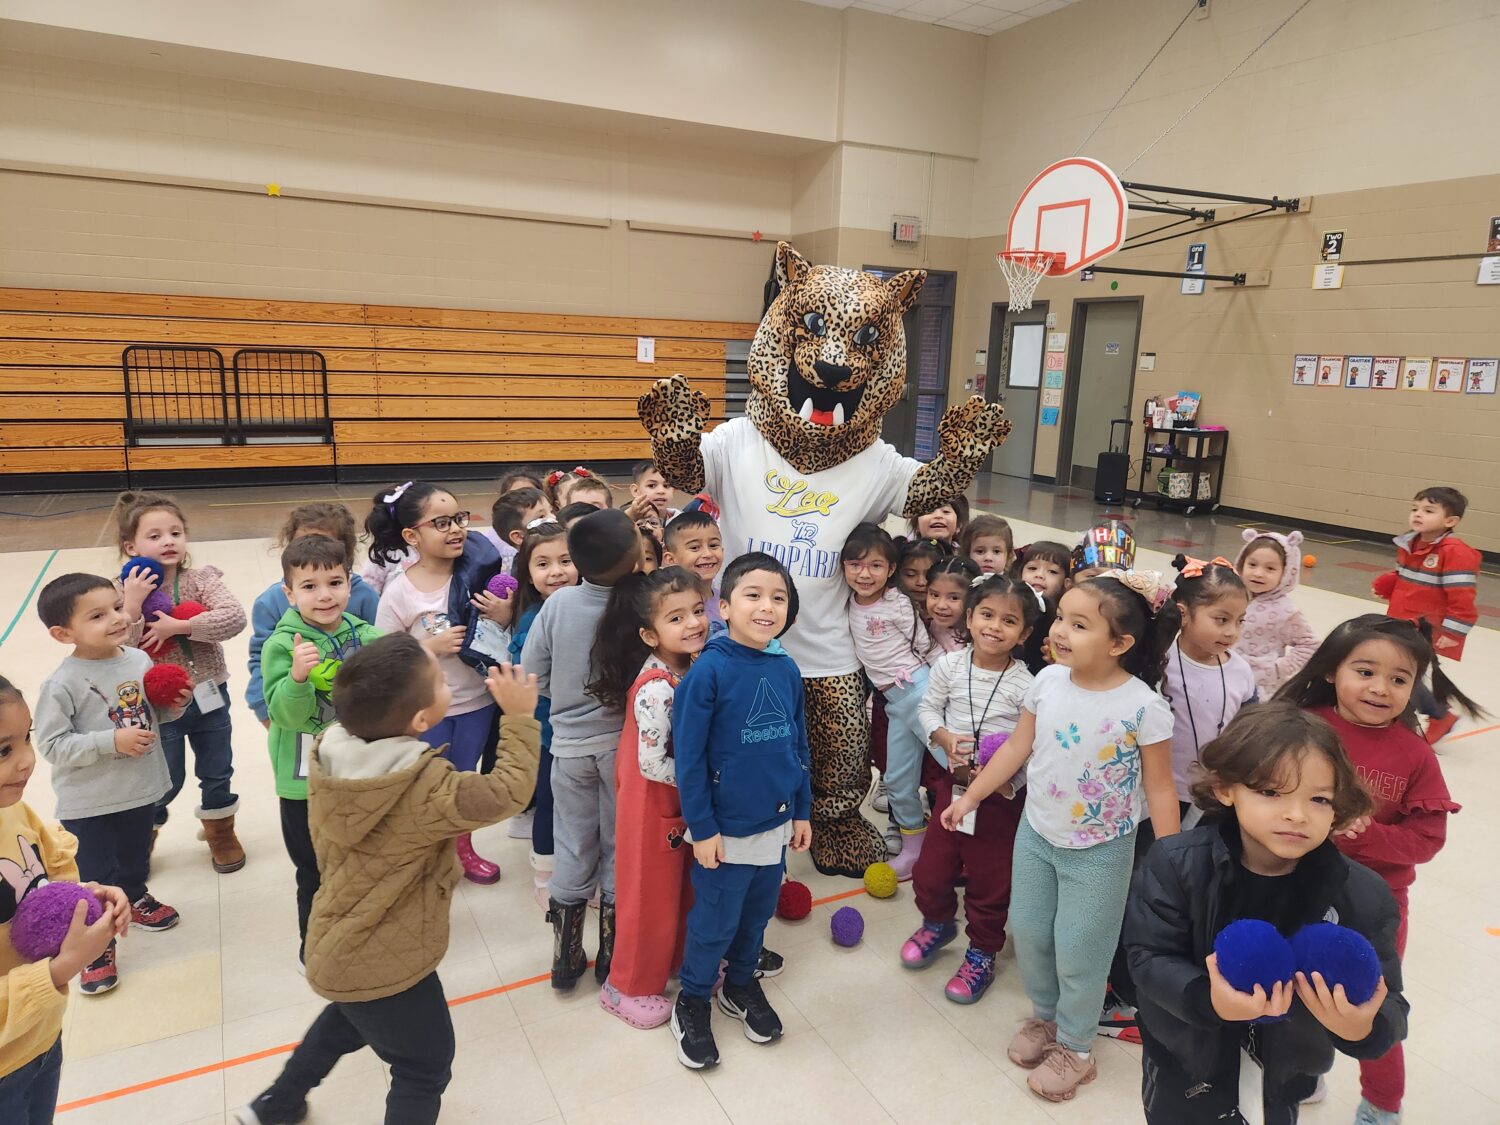 Lamar Elementary mascot Leo the Leopard visits students in the gym.